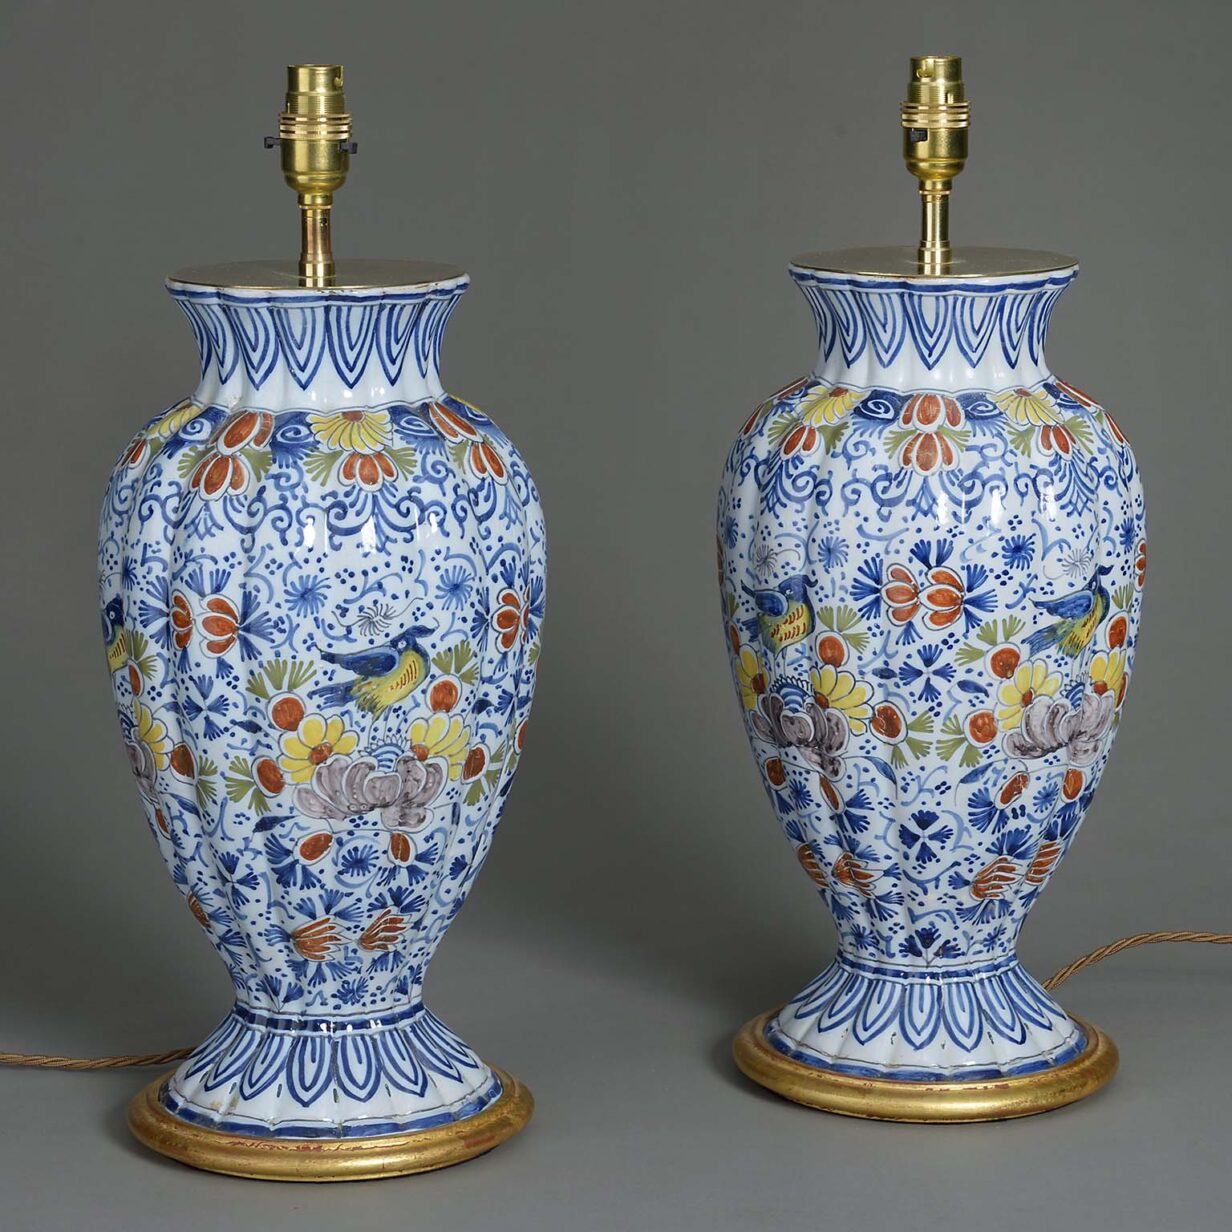 Pair of faience vase lamps